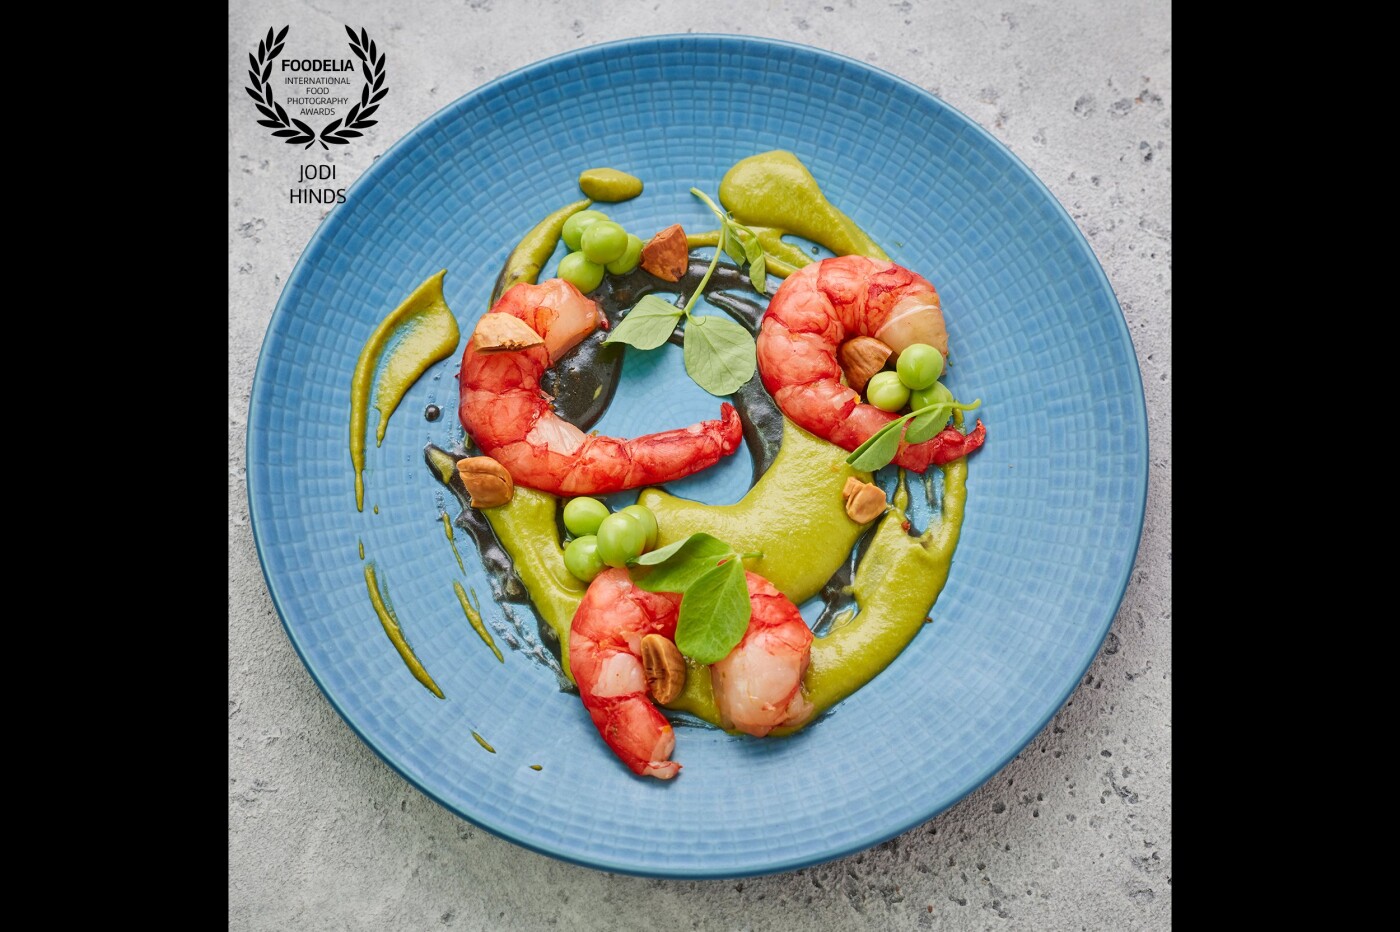 Chef Mike Reid never fails to bring out new, creative and sumptuous dishes at M Restaurants.  Here is his cured red prawns, english peas, coal cooked potato and squid ink sauce.<br />
Chef: @mikereidchef<br />
Restaurant: @mrestaurants<br />
Owner: @martinwilliams32<br />
Photograph: @jodihindsphoto